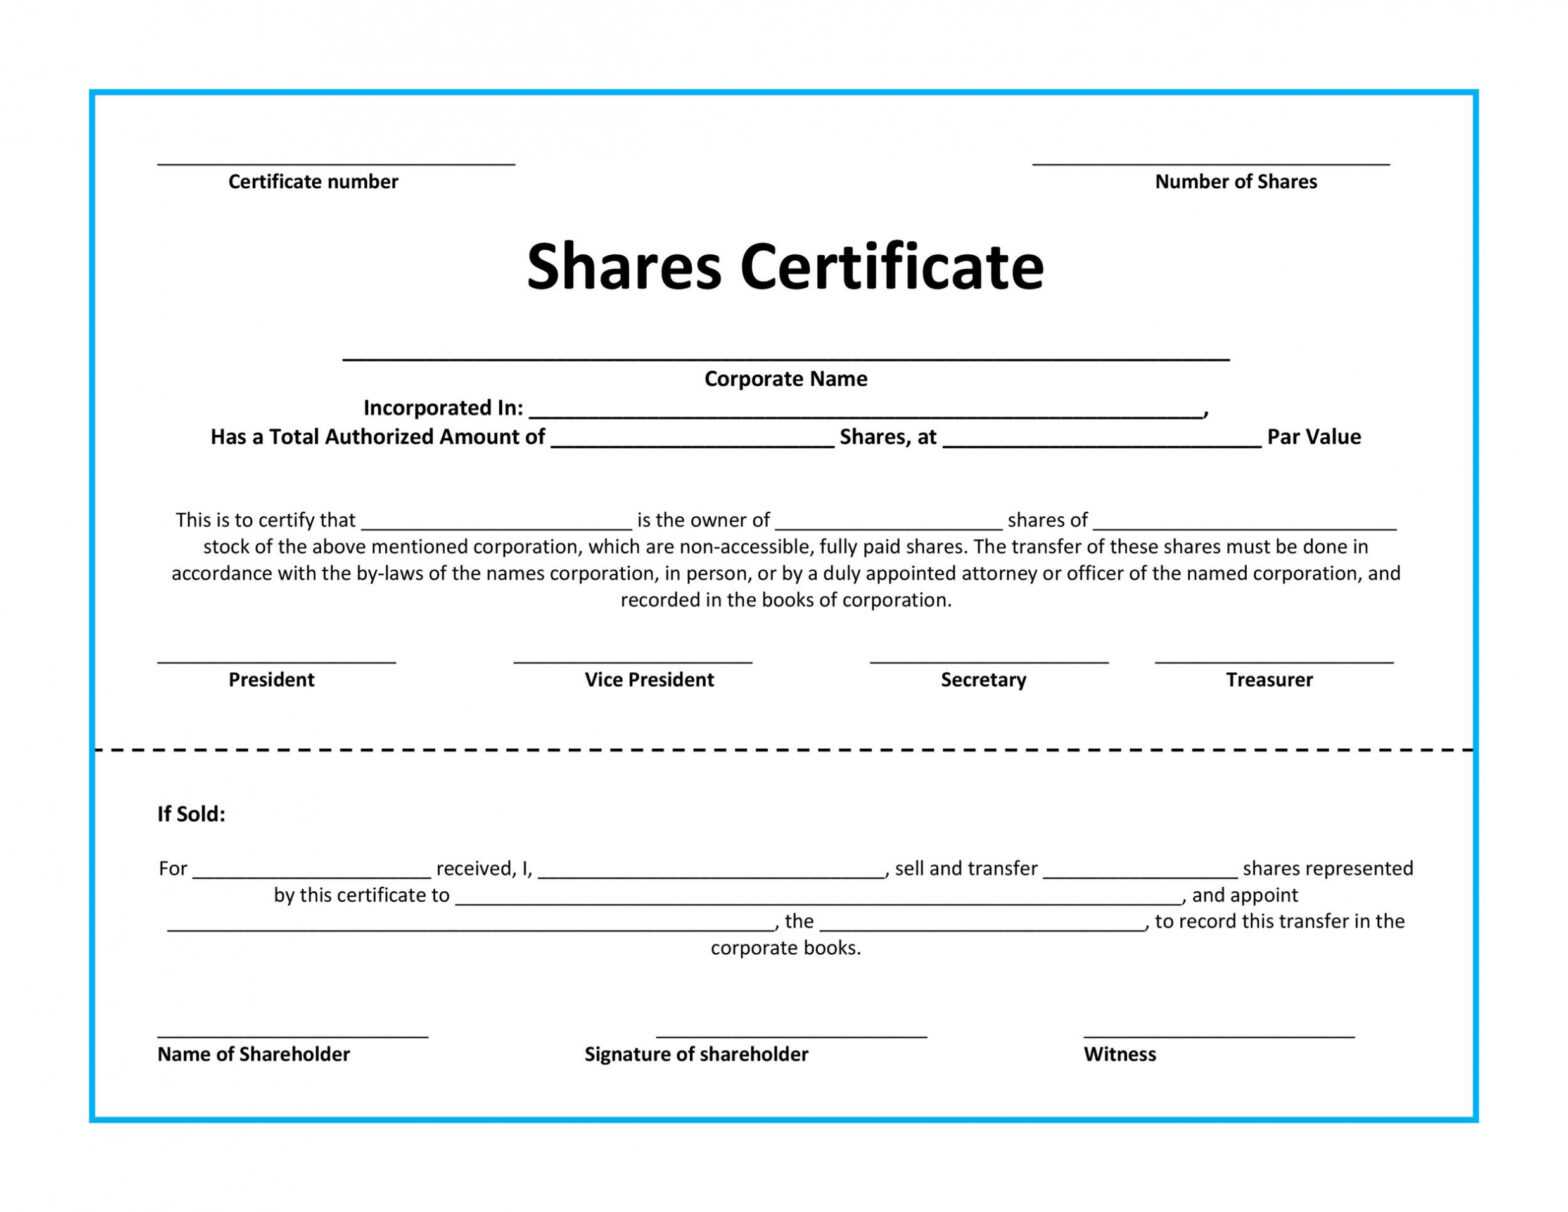 40+ Free Stock Certificate Templates (Word, Pdf) ᐅ Templatelab with regard to Template Of Share Certificate